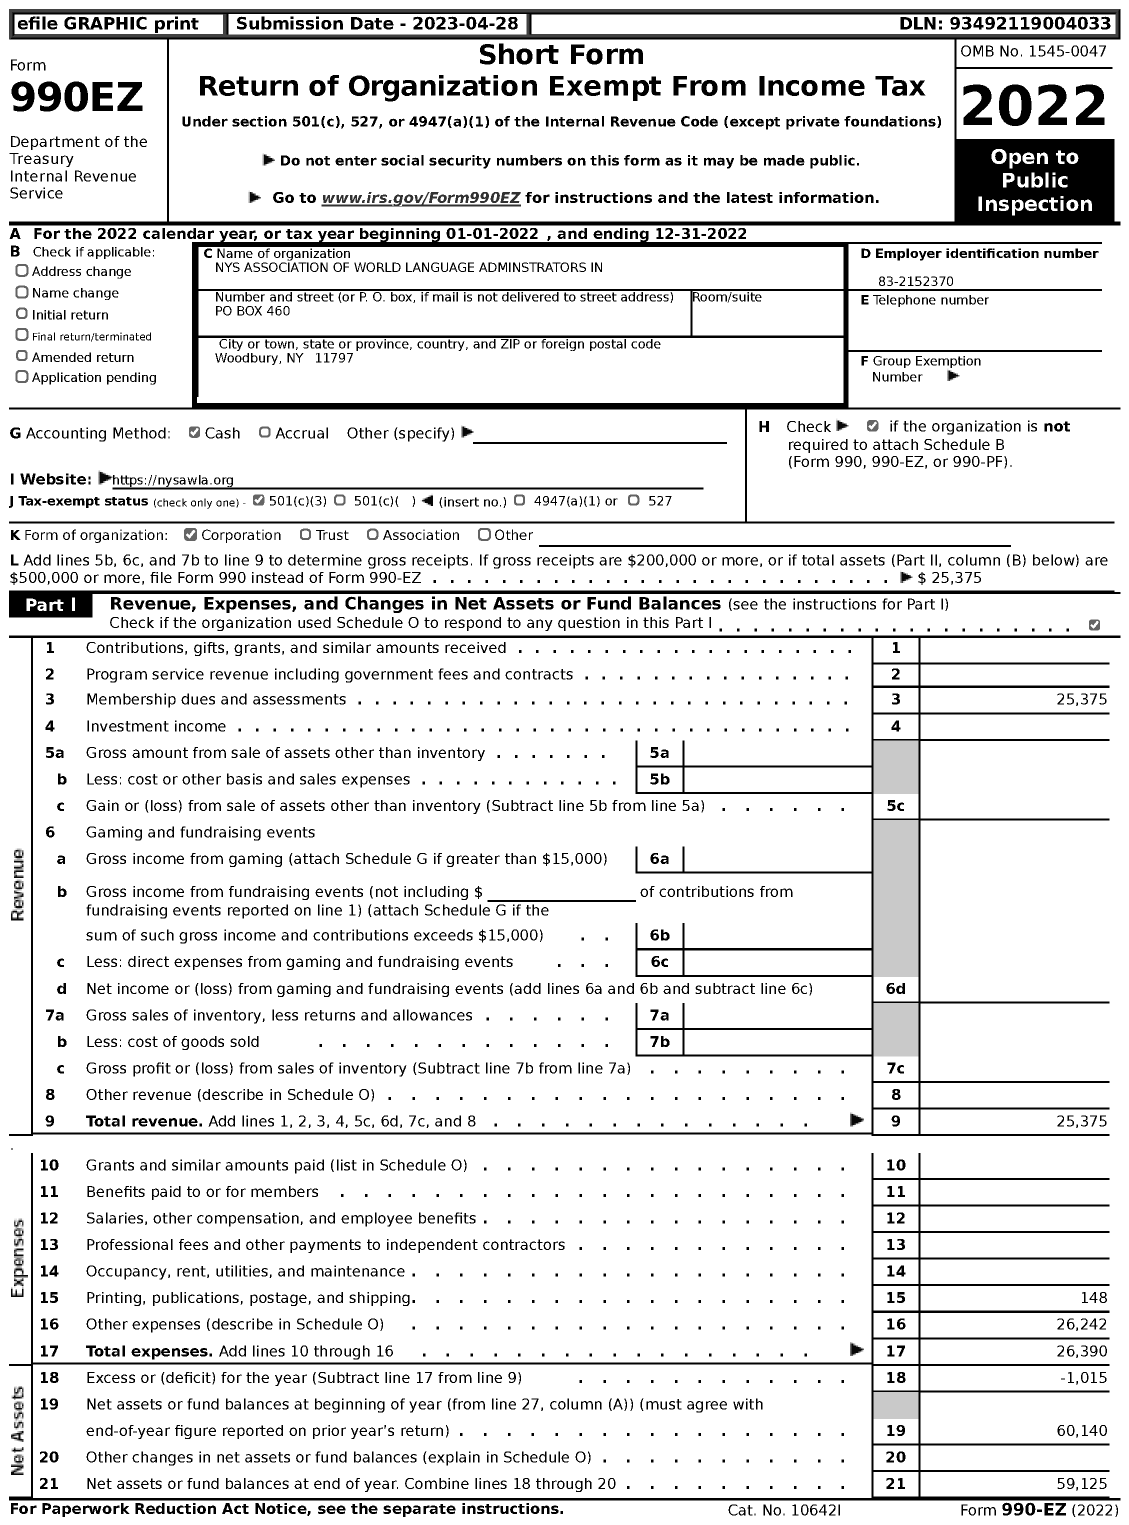 Image of first page of 2022 Form 990EZ for Nys Association of World Language Administrators